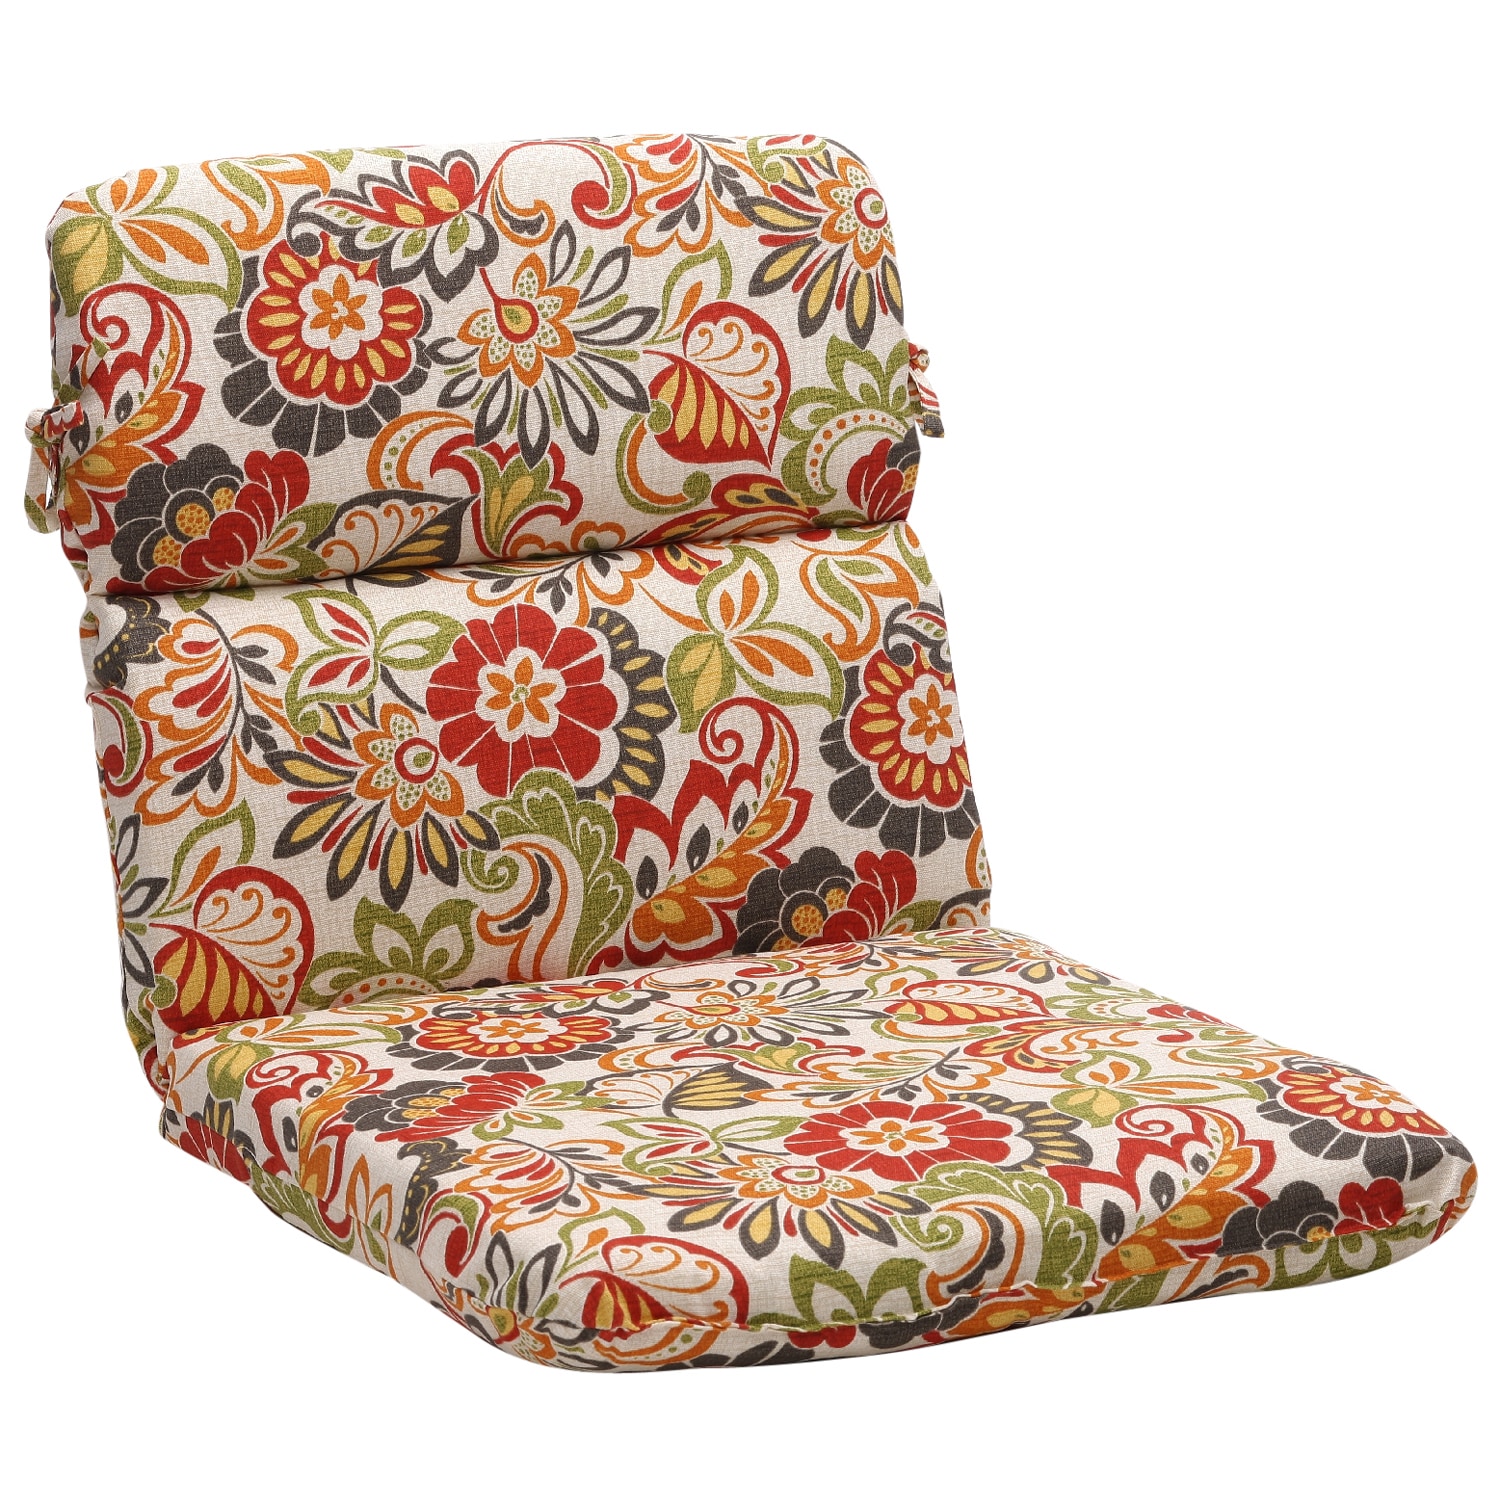 Rounded Multicolored Floral Outdoor Chair Cushion - 14095677